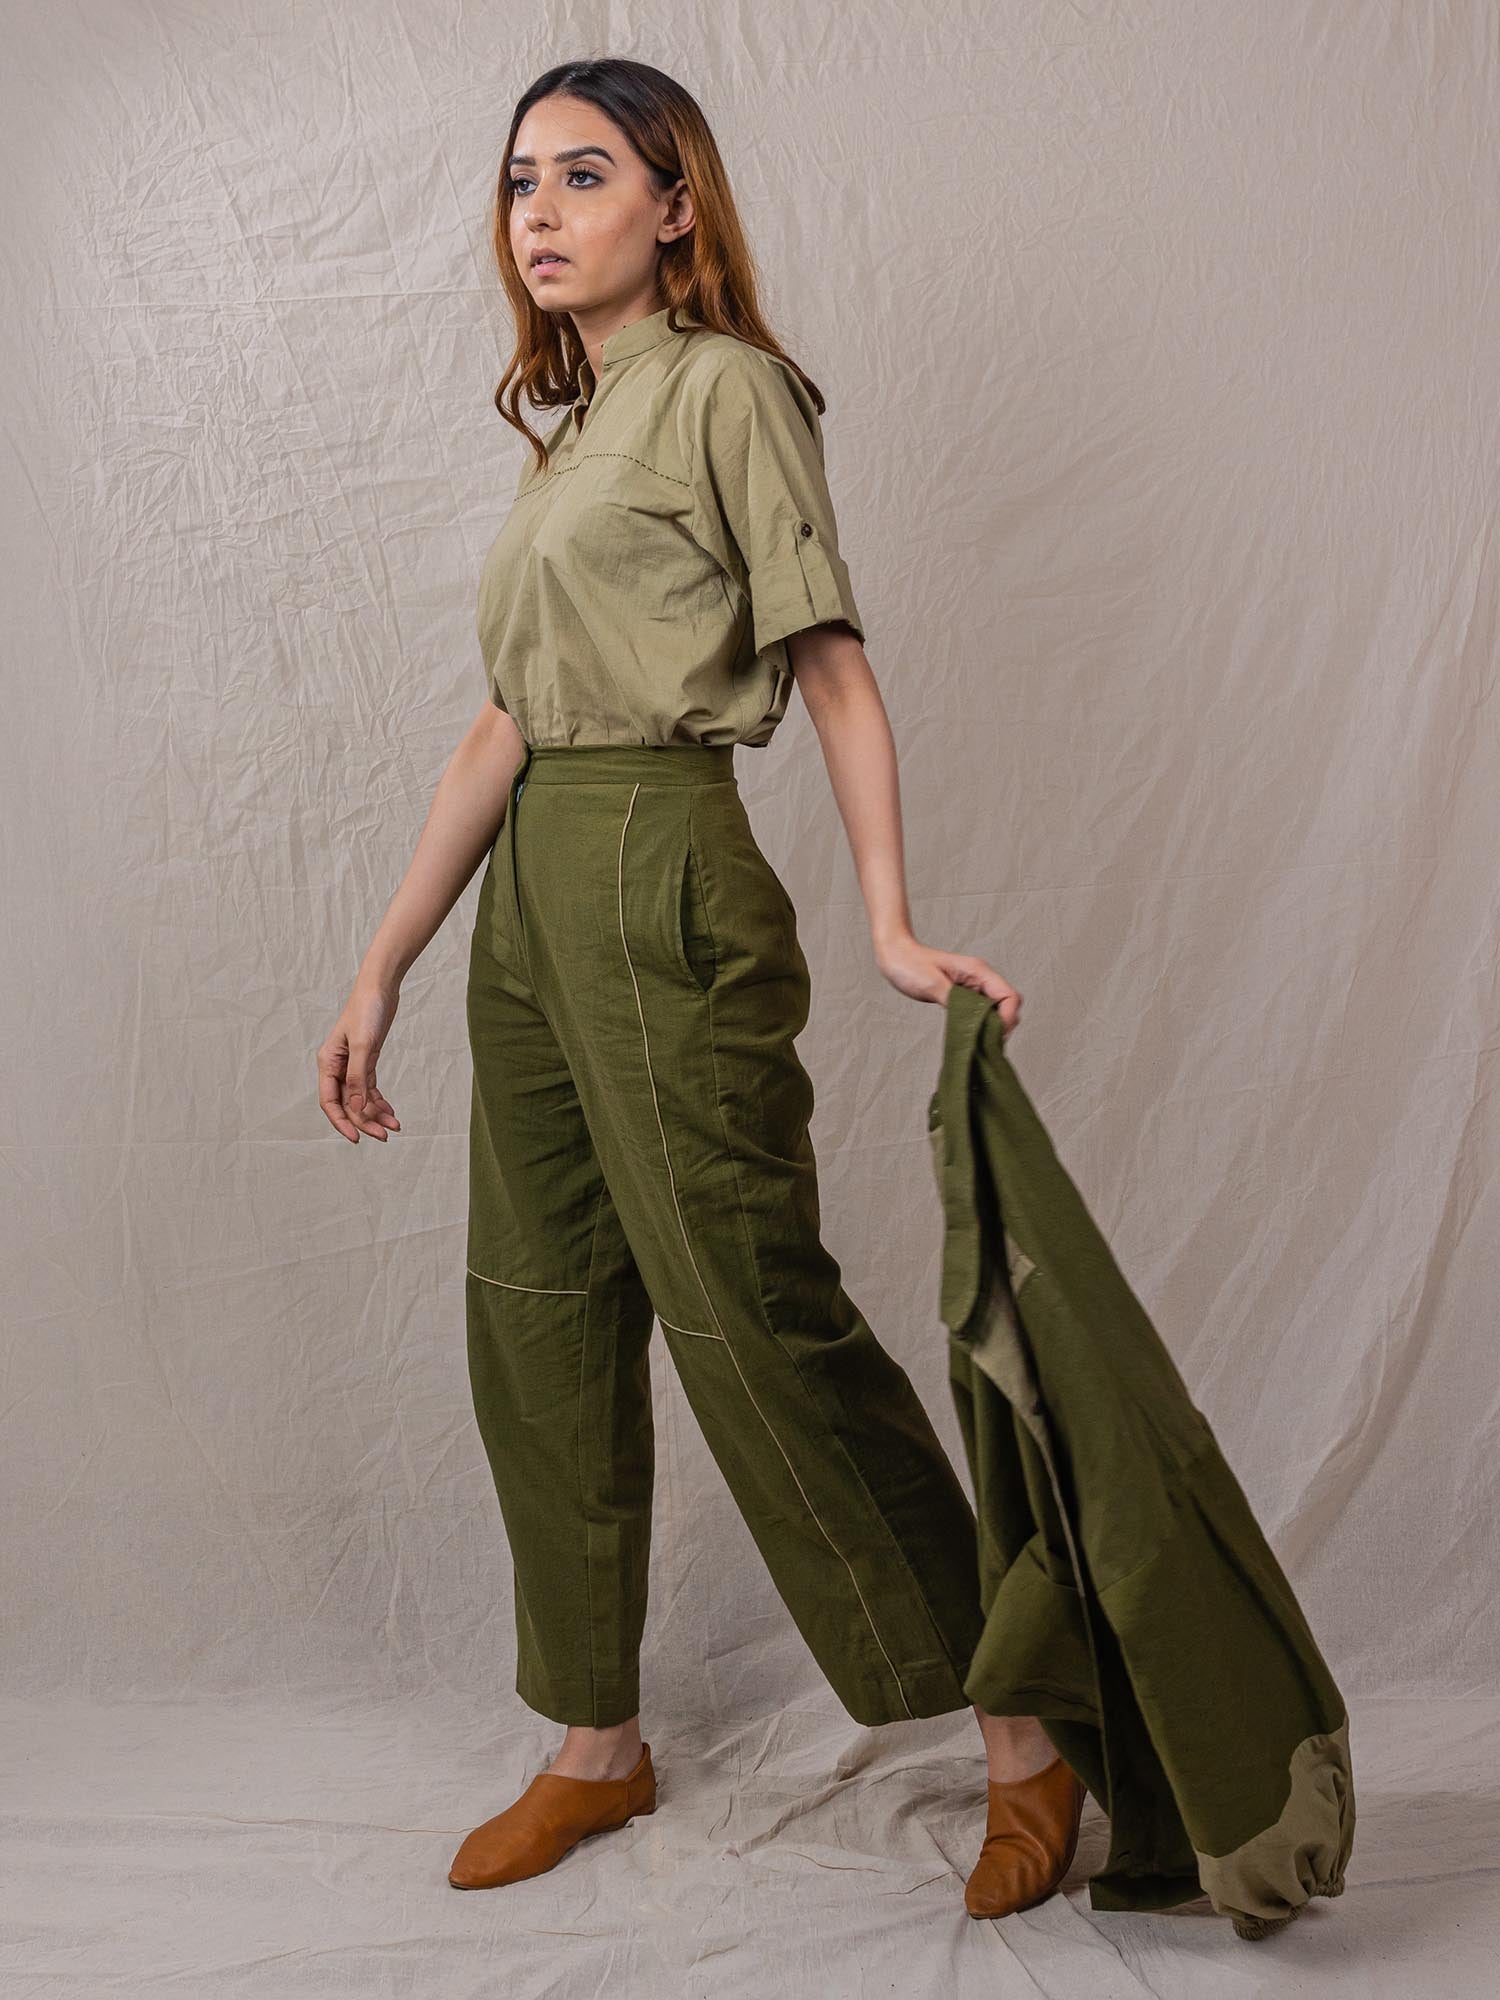 Cargo Pants for Men and Women: A Style Guide | ERVINE |